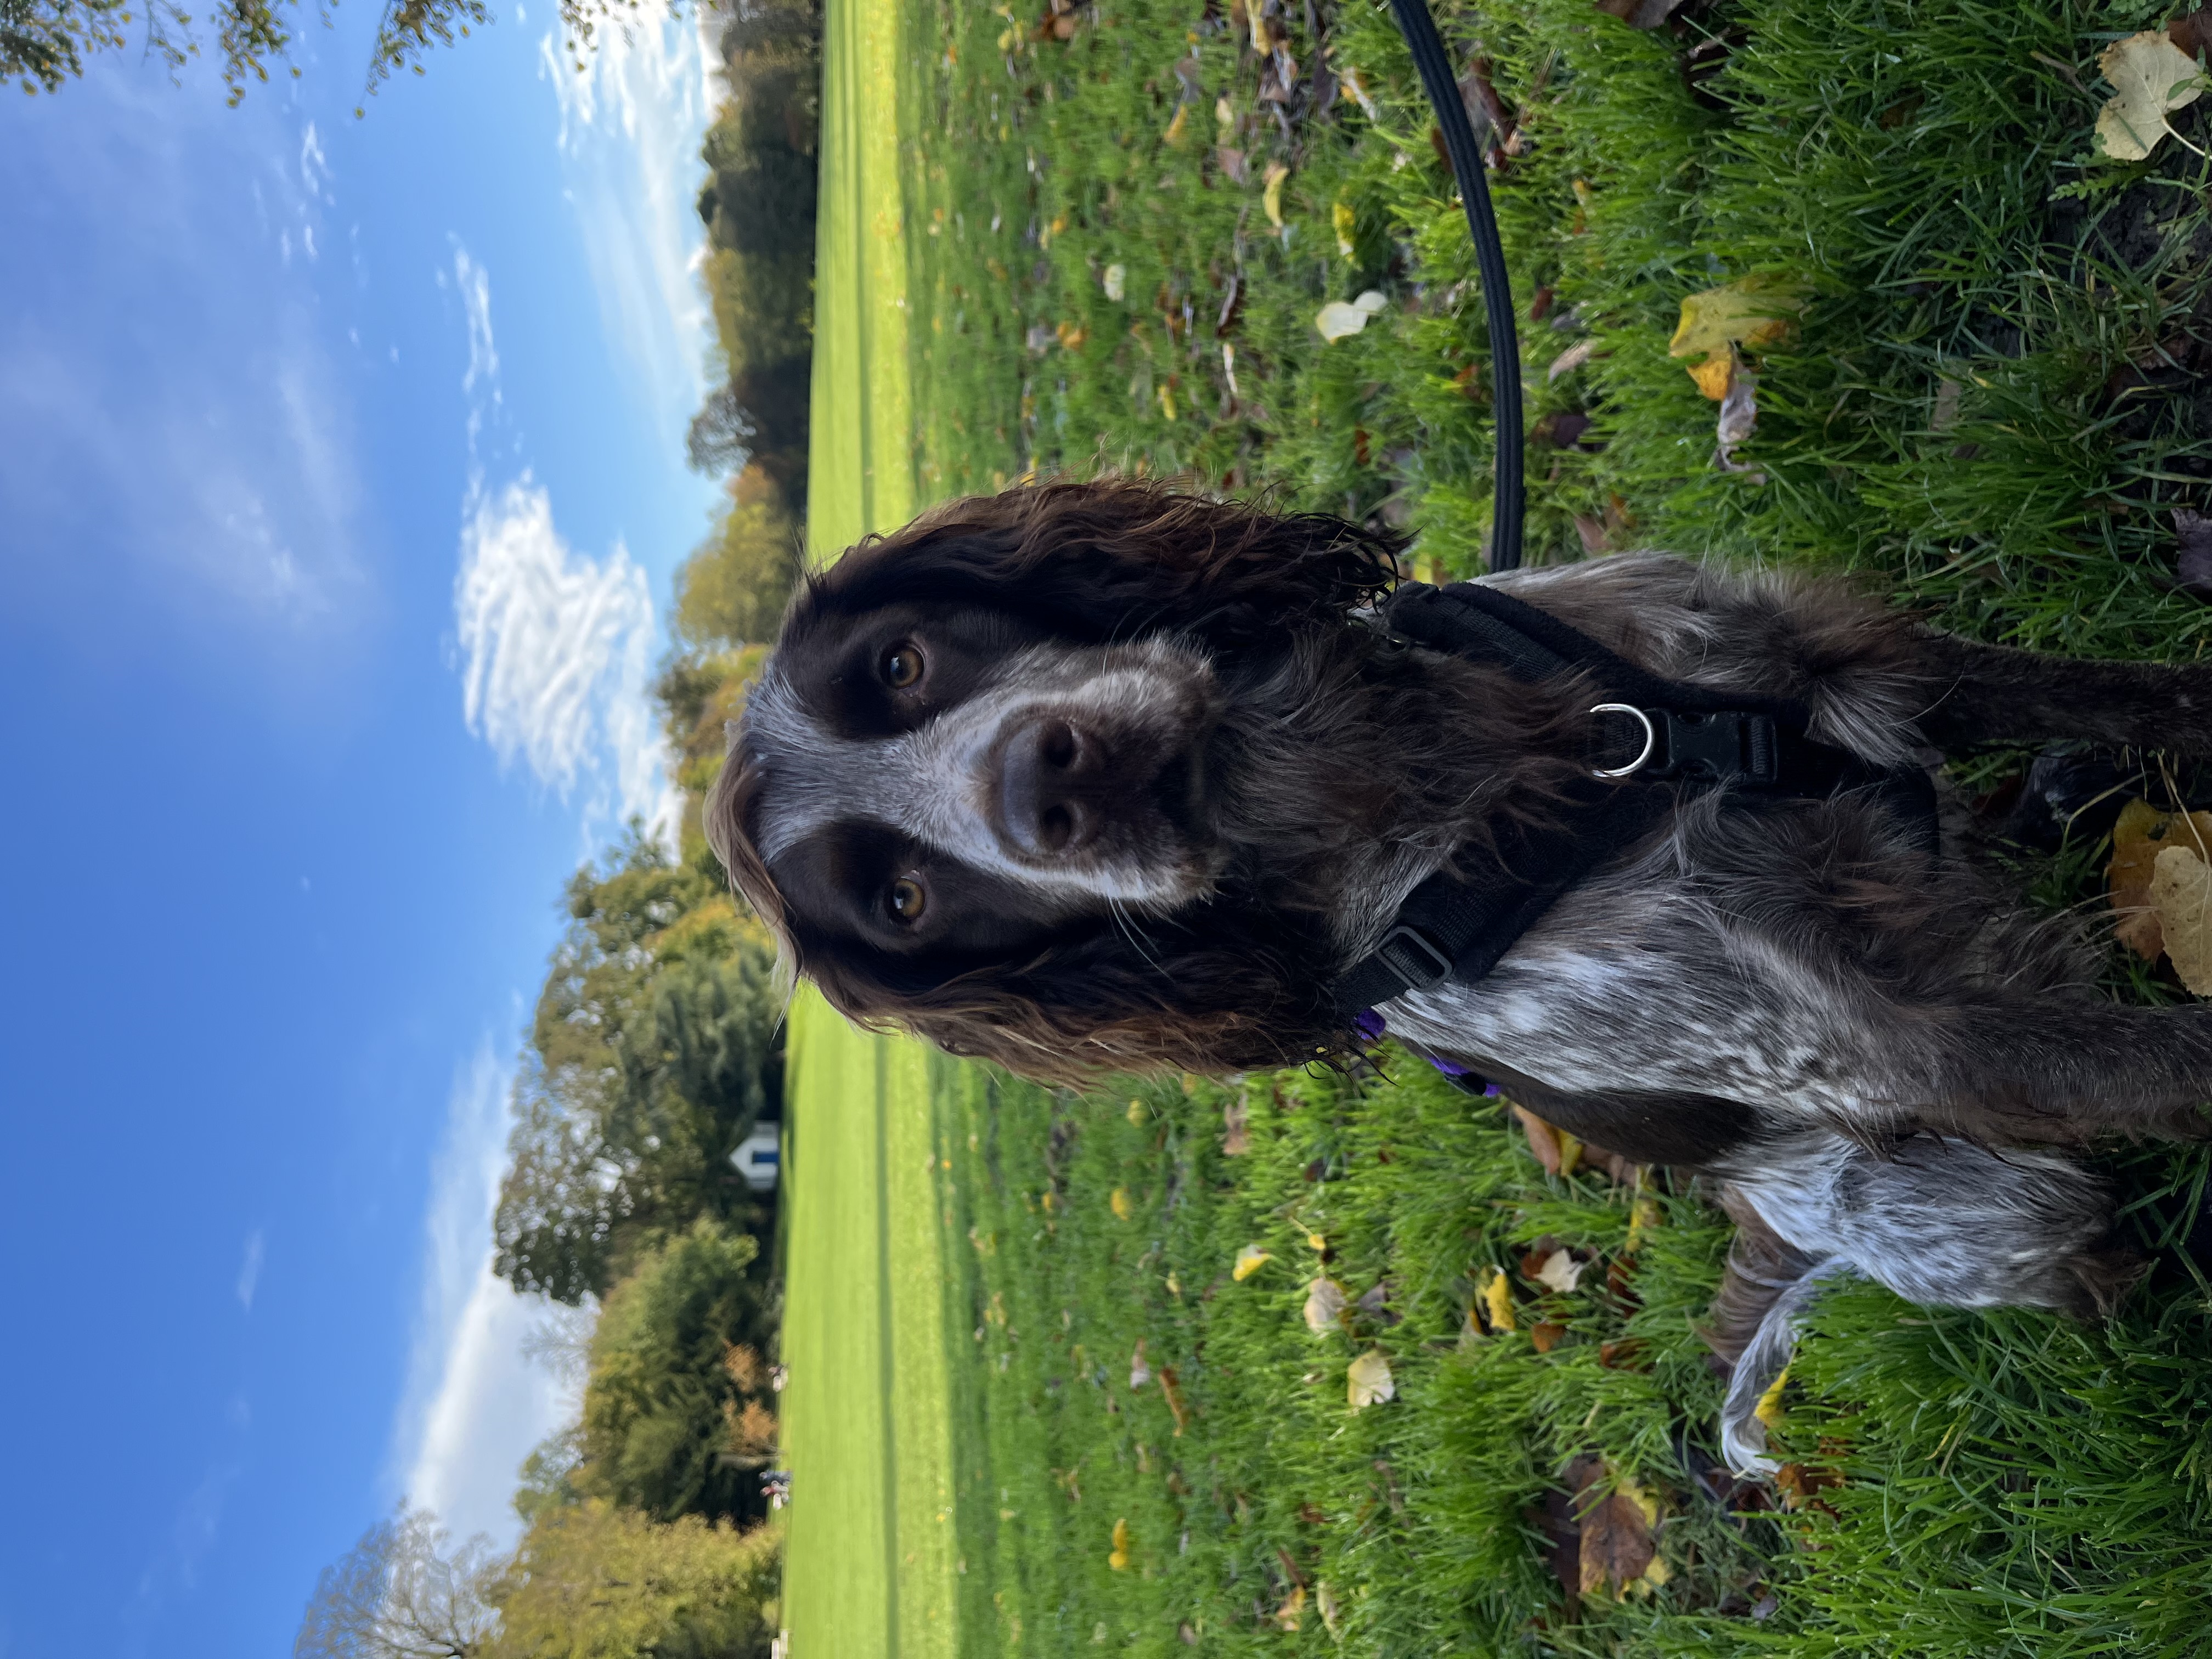 A chocolate roan dog sits facing the camera. He is sat in the shade on green grass, in the backdrop the sun shines on green grass and trees.